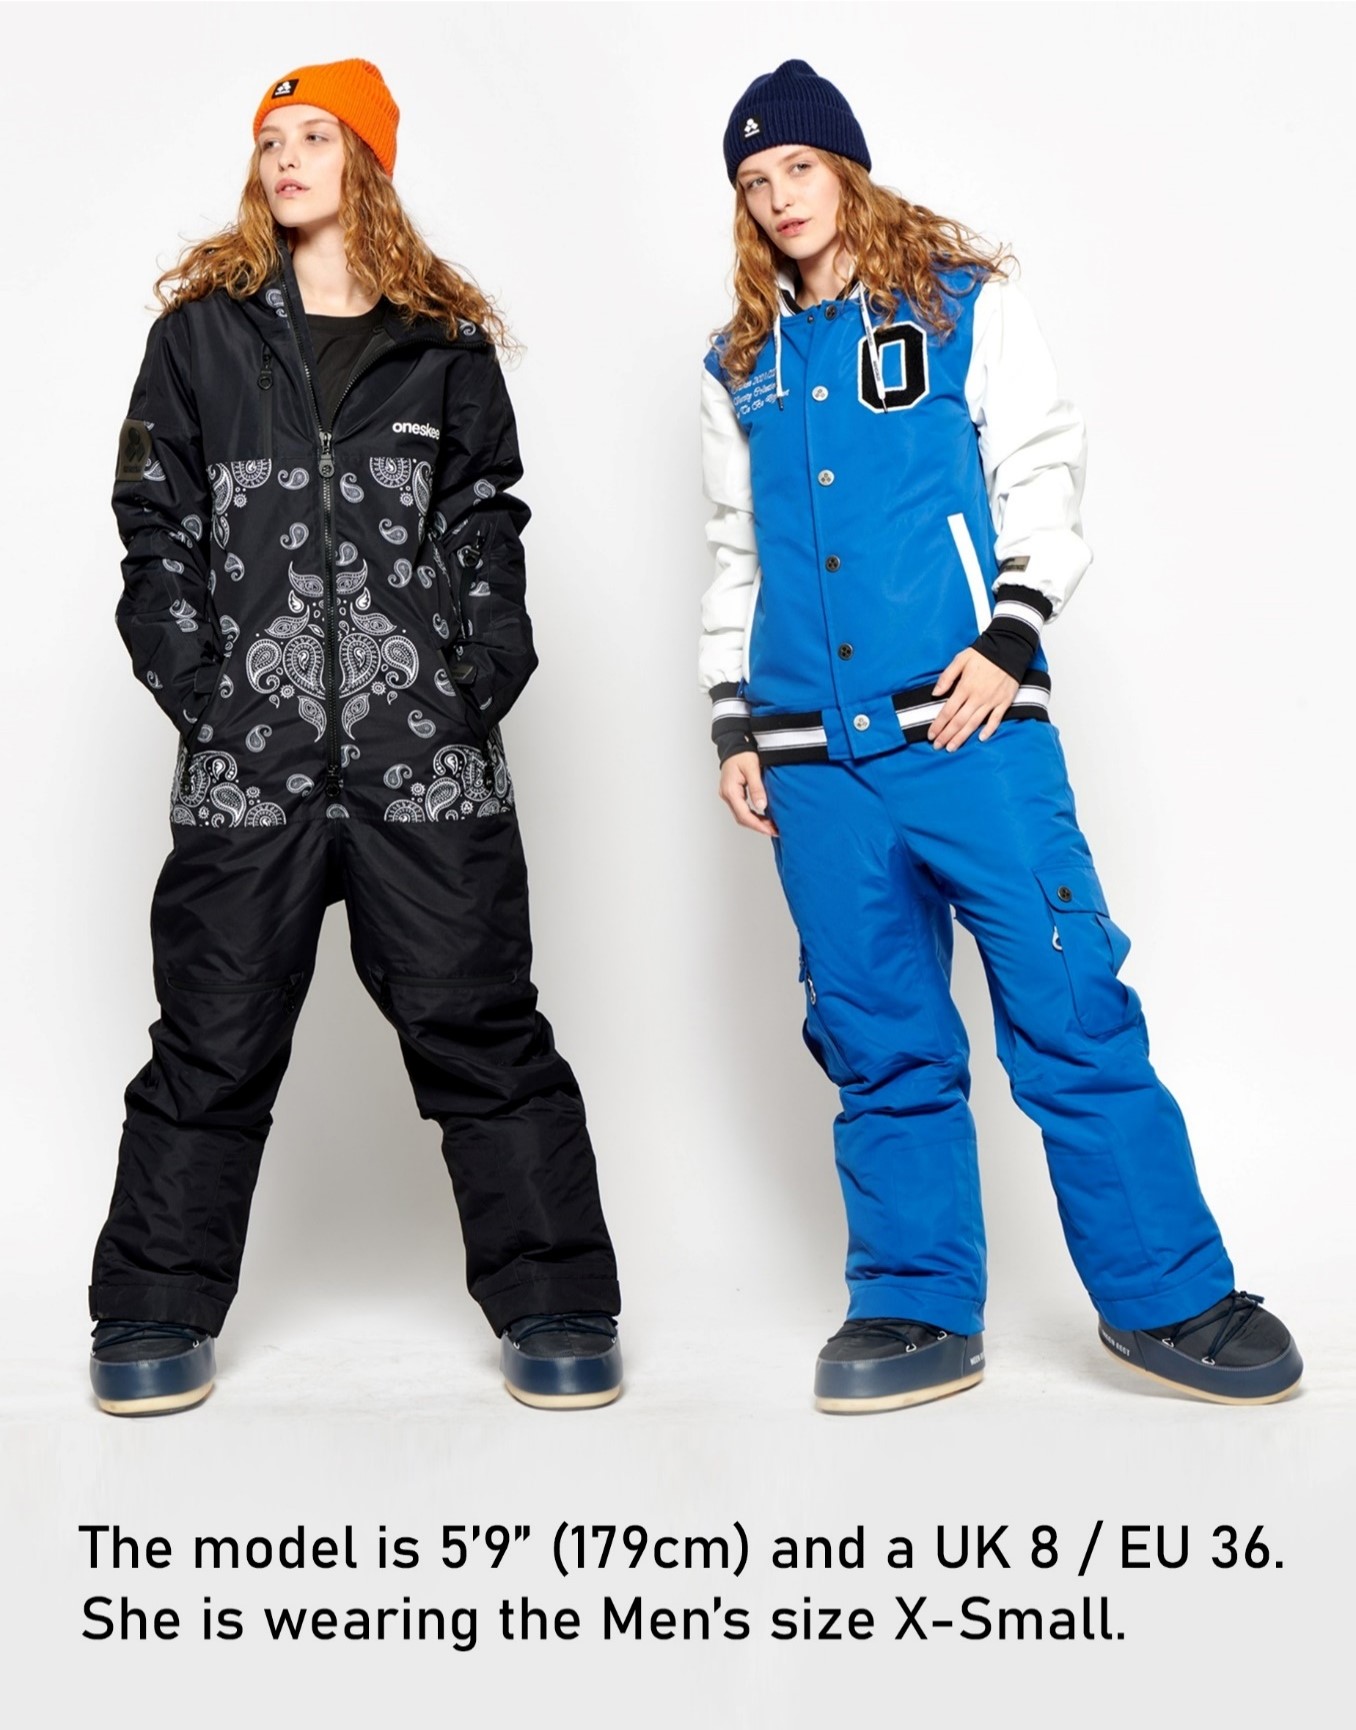 Female modelling two Ski Suits. The model is 5'9" (179cm) and a UK 8 / EU 36. She is wearing the Men's size X-Small.